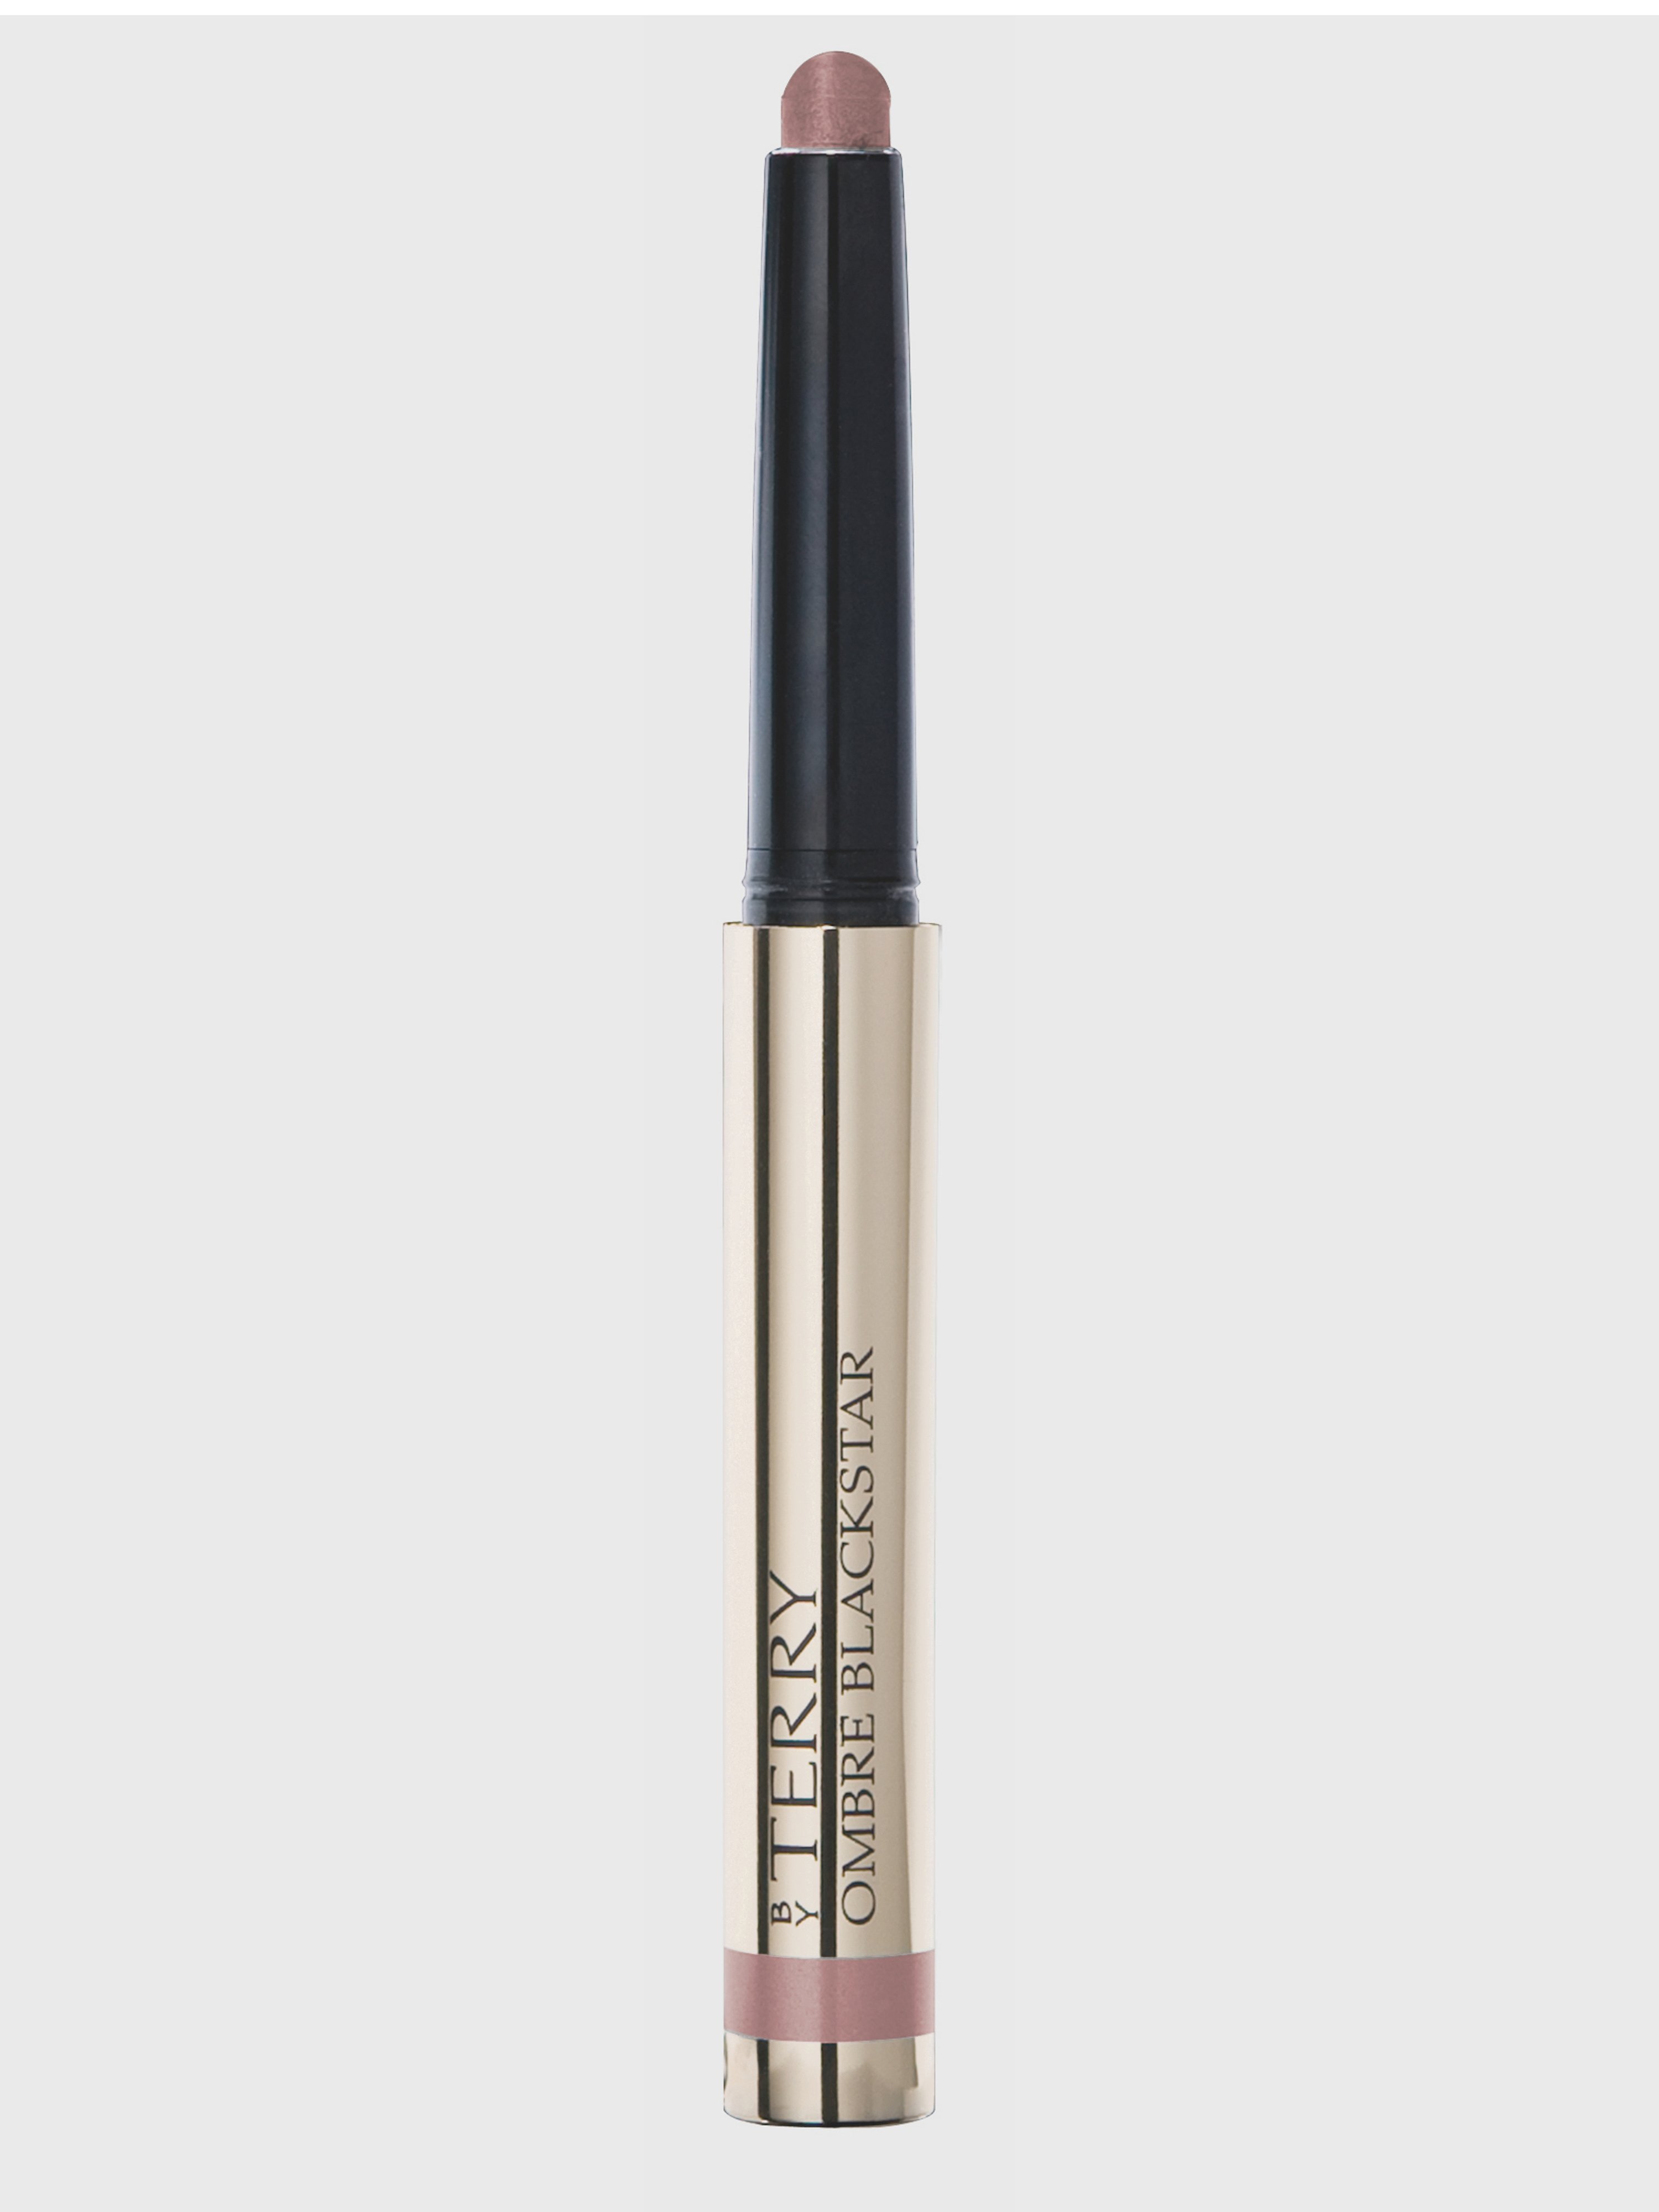 BY TERRY BY TERRY OMBRE BLACKSTAR COLOR-FIX CREAM EYESHADOW